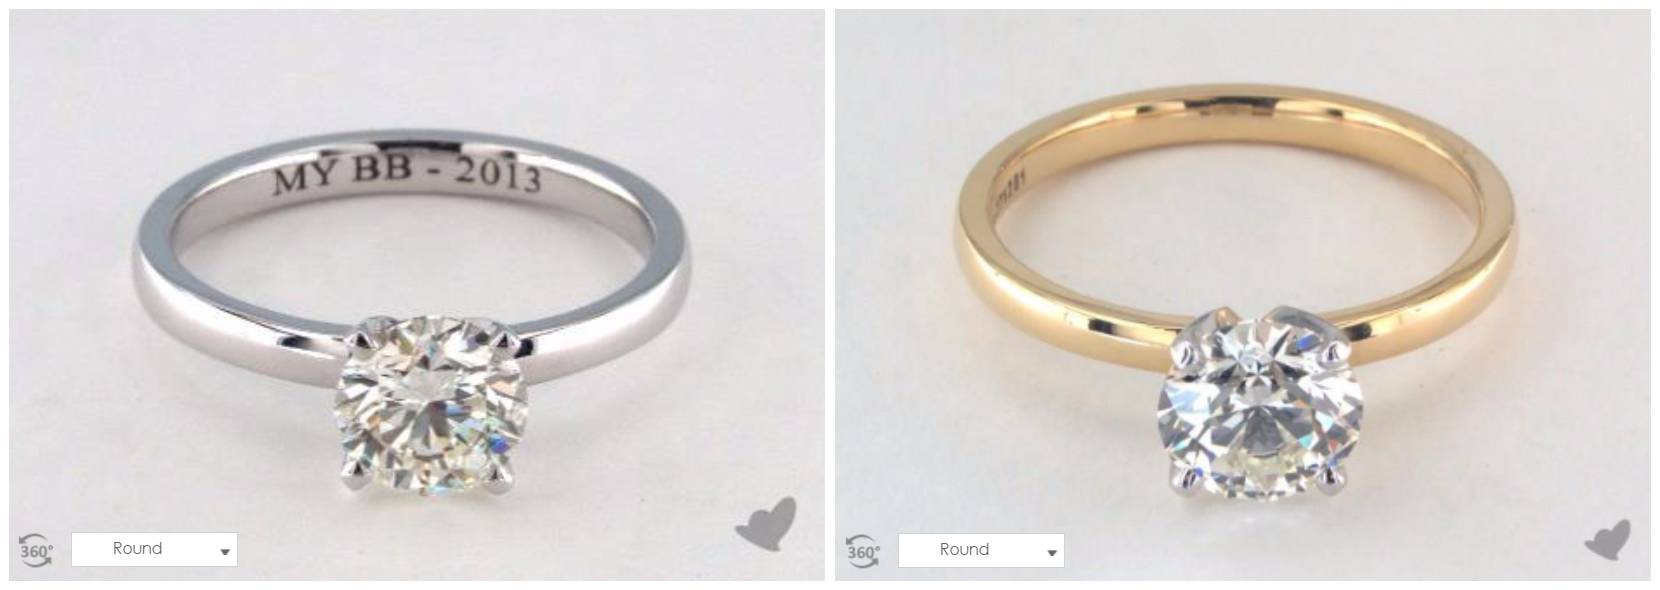 tyfon realistisk Vend tilbage White Gold or Yellow Gold: Which is Better Engagement Ring?